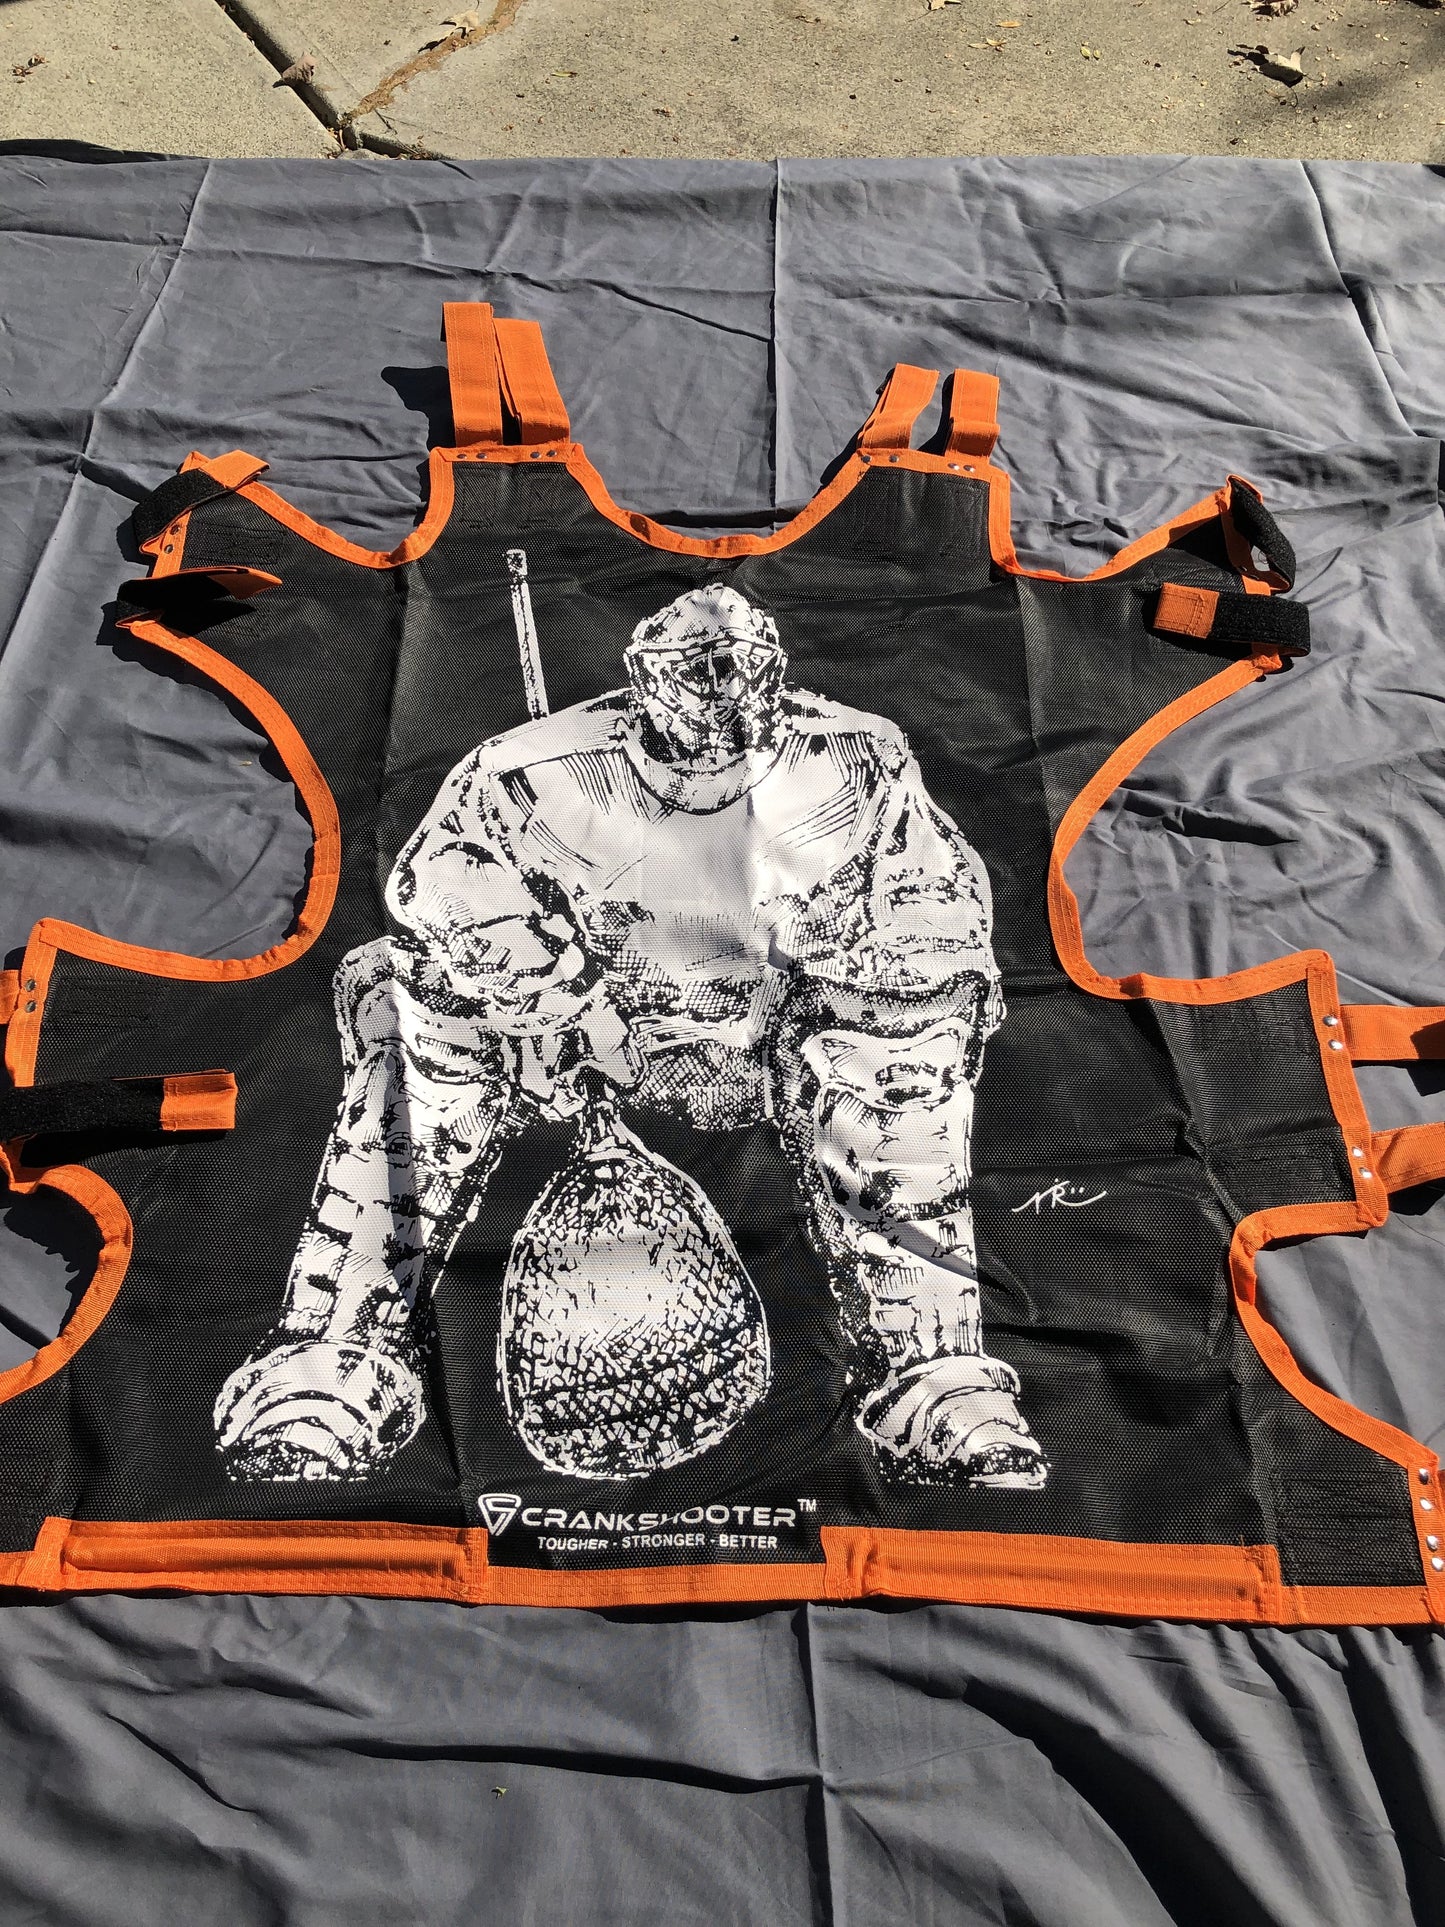 NEW! Hi-Impact "BIG GOALIE" BOX Lacrosse Shot Trainer by CrankShooter® For 4'x4' BOX GOALS ONLY -Triple Stitching - FREE Shipping